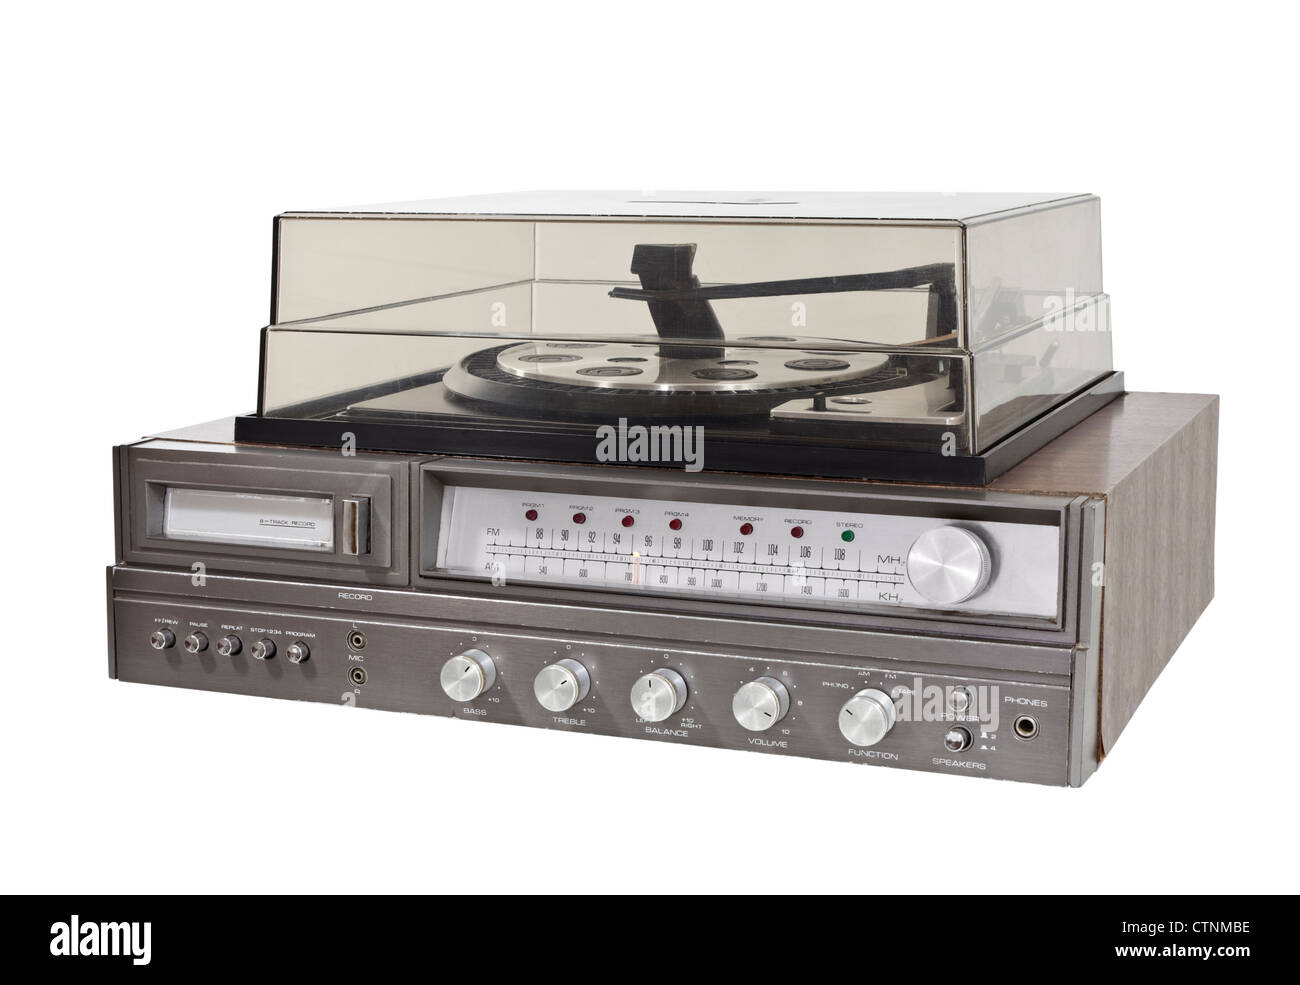 Vintage 1970s 8 track stereo record player with clipping path. Stock Photo